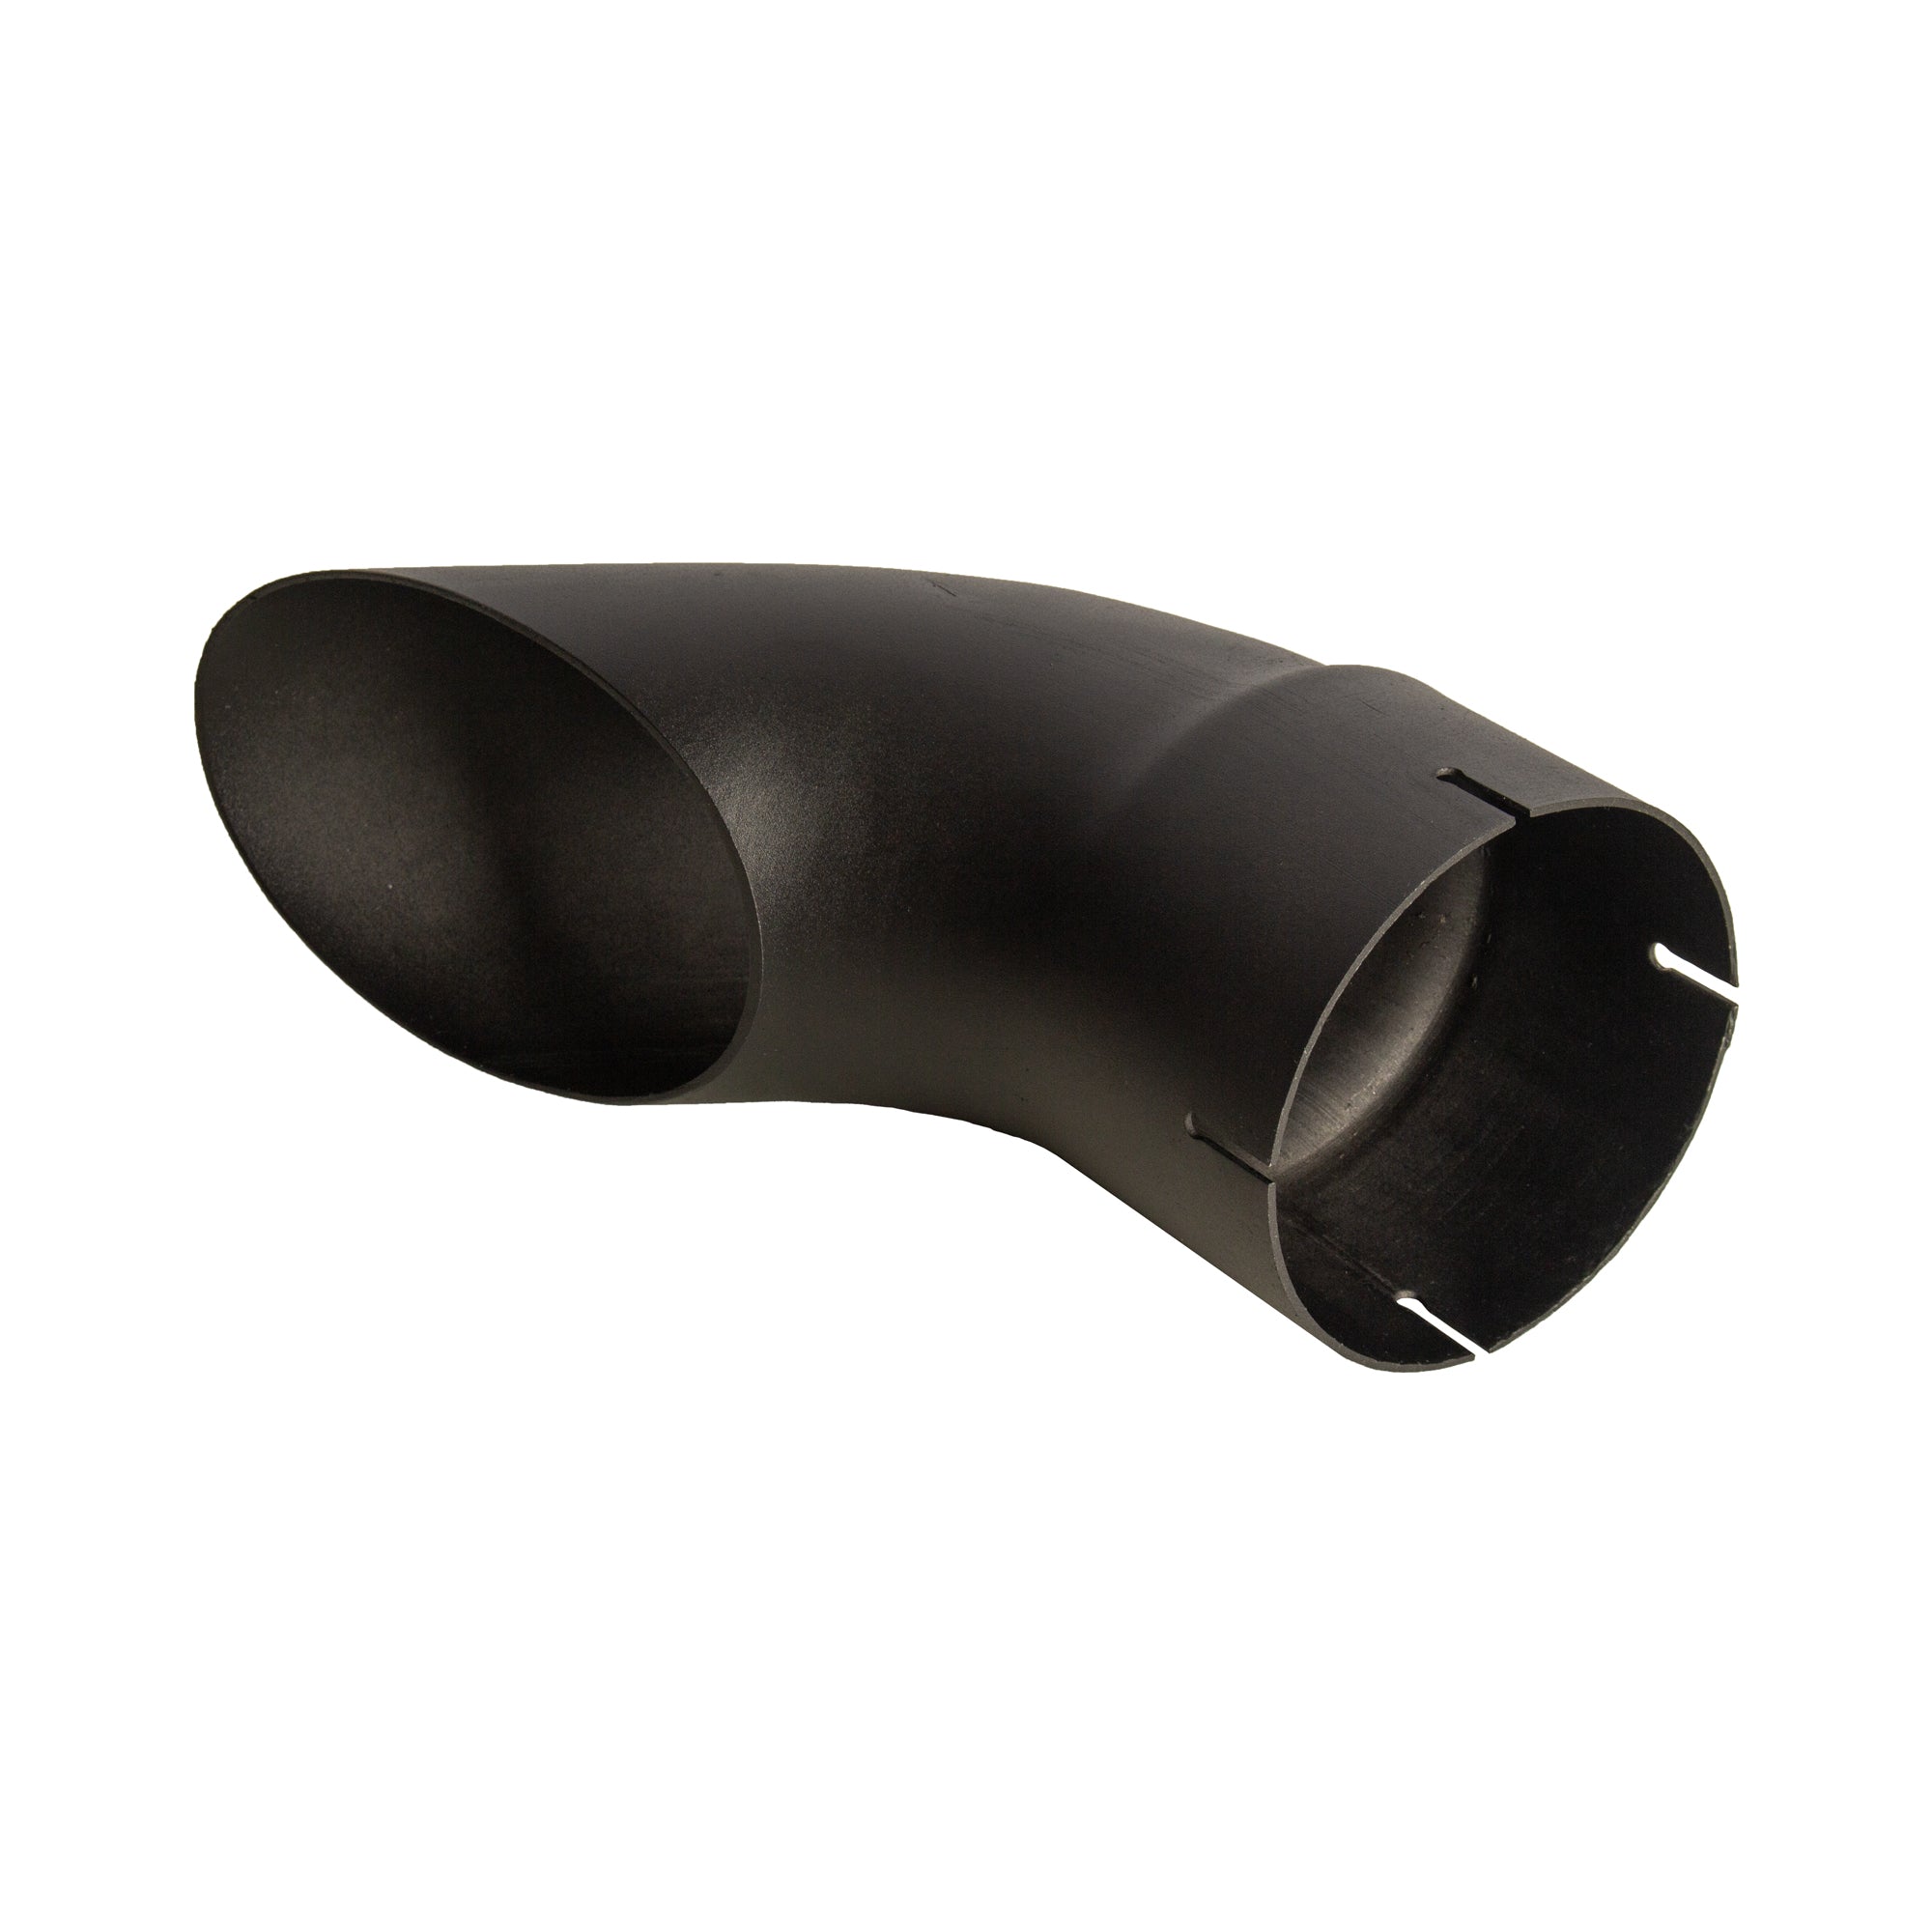 Exhaust Stack Pipe Replacement for Universal - 5" x 12", Curved Black